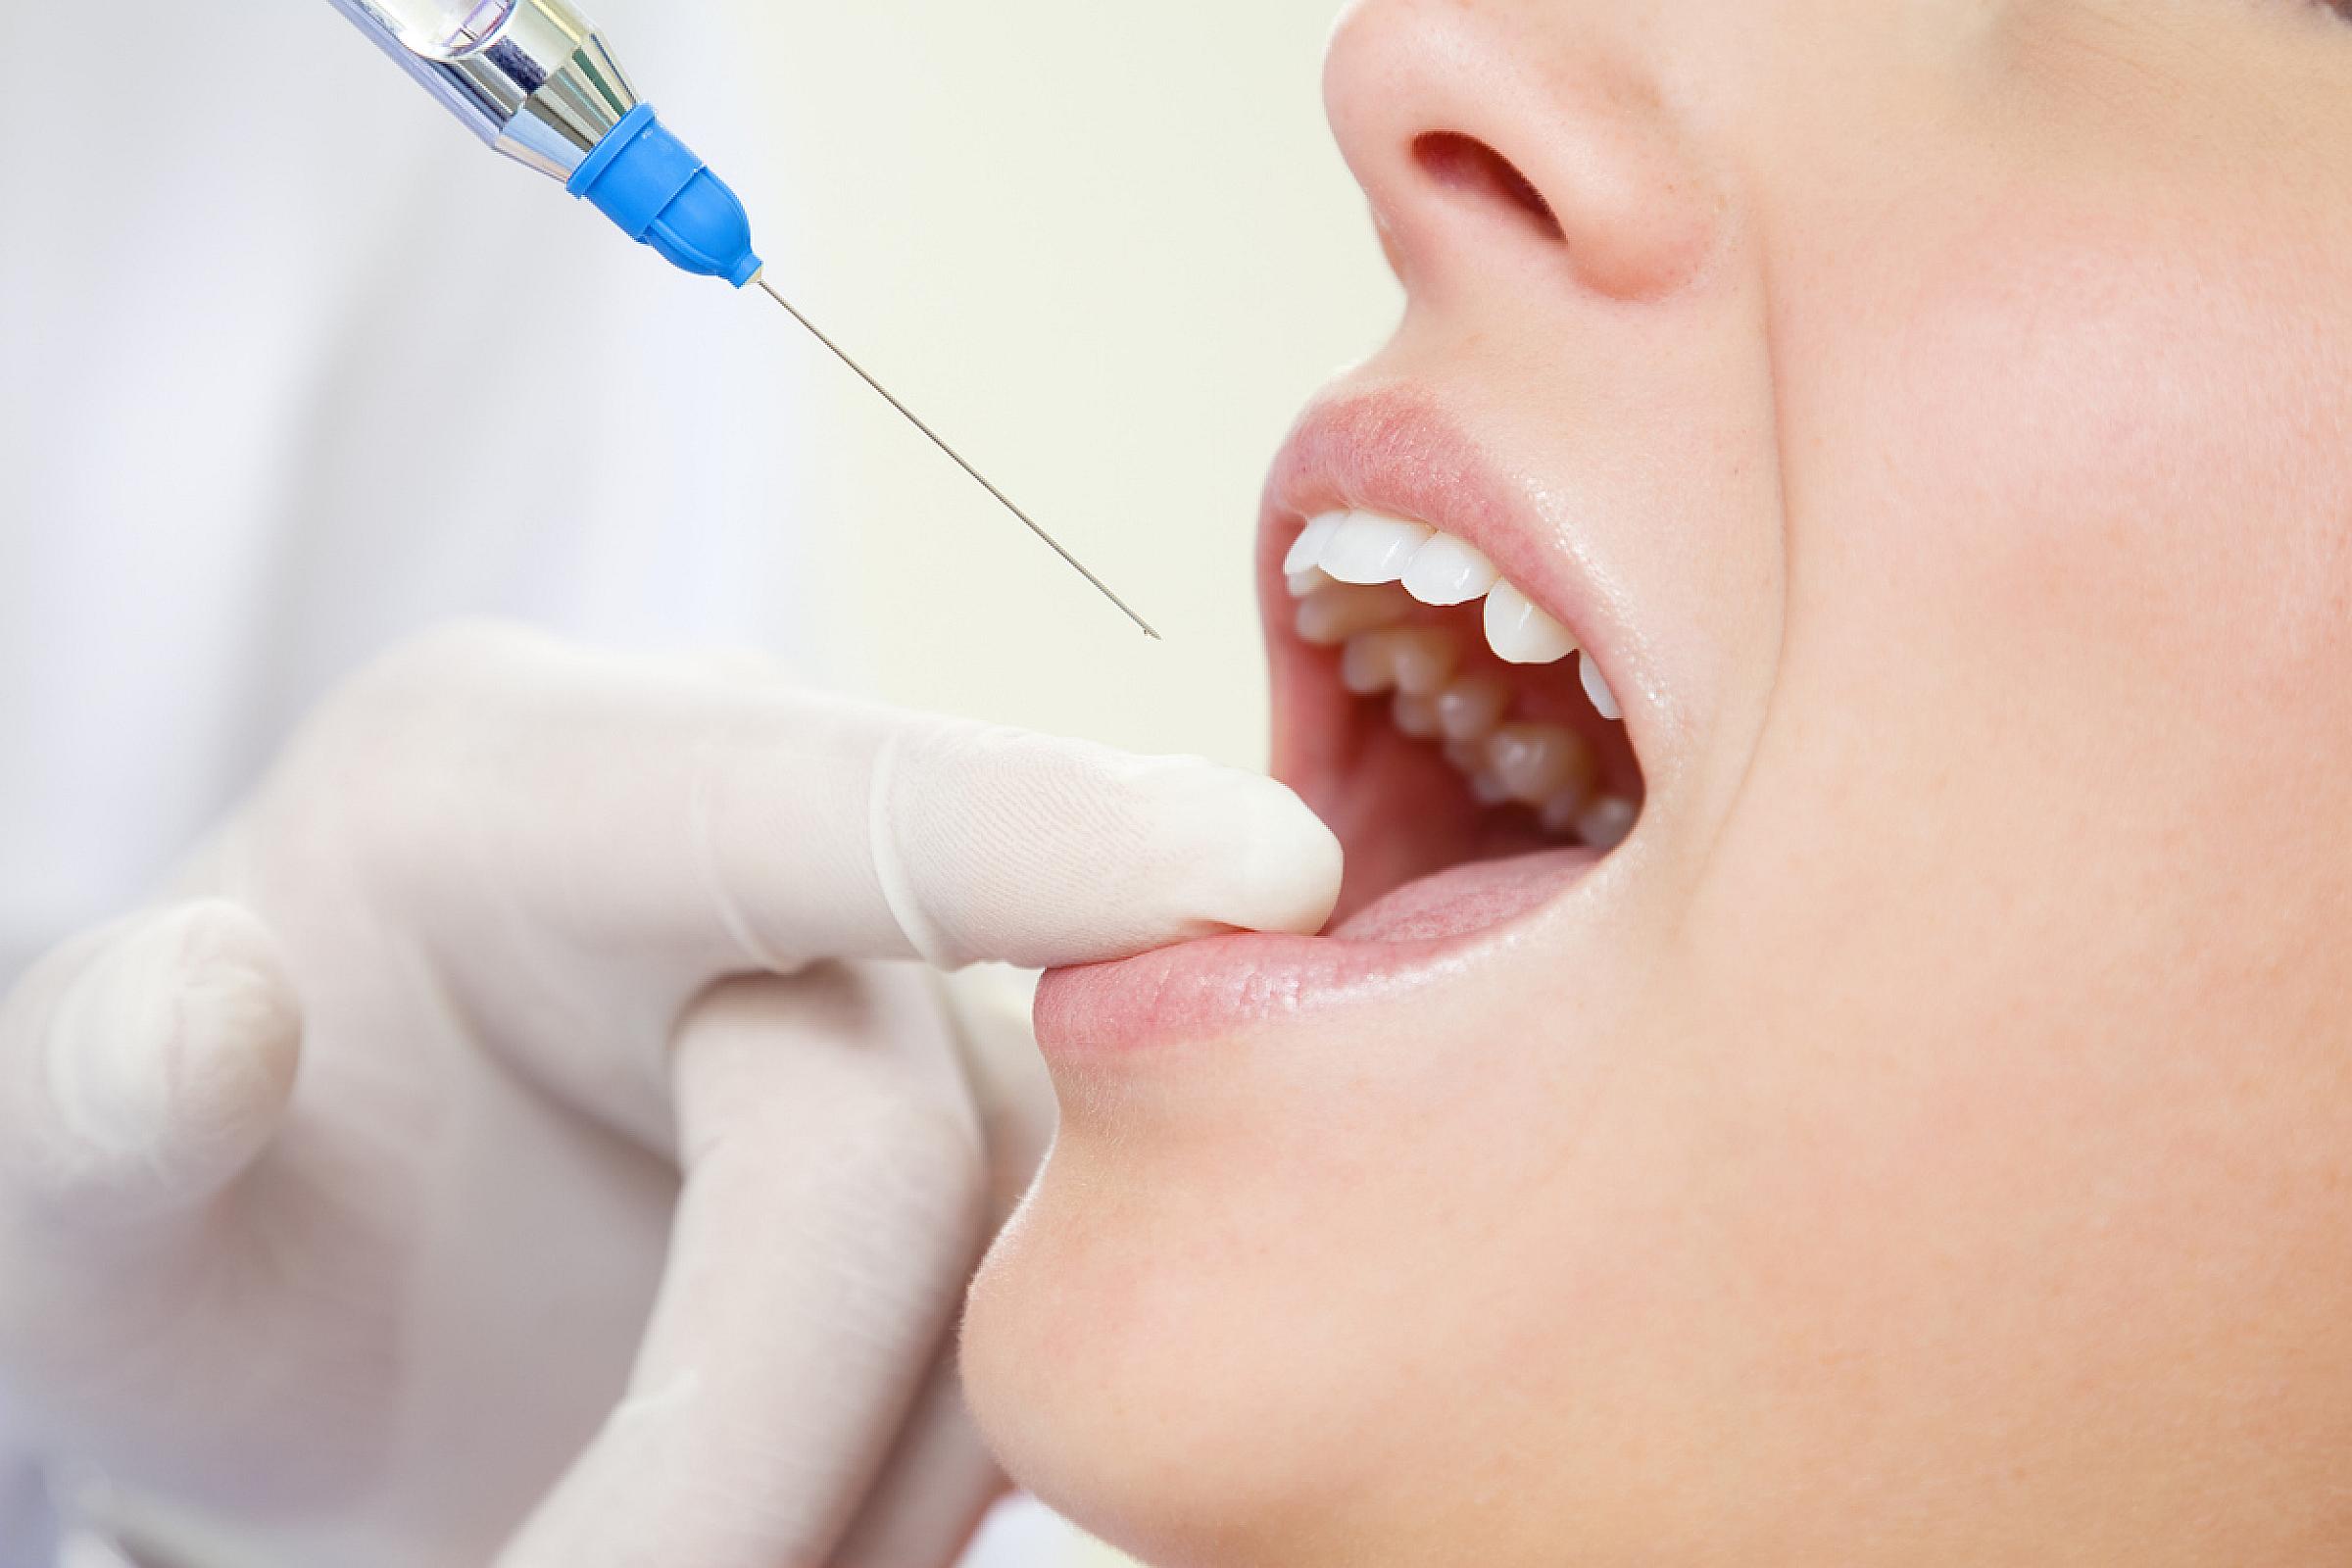 open mouth and dentist syringe giving local anesthetic to patient